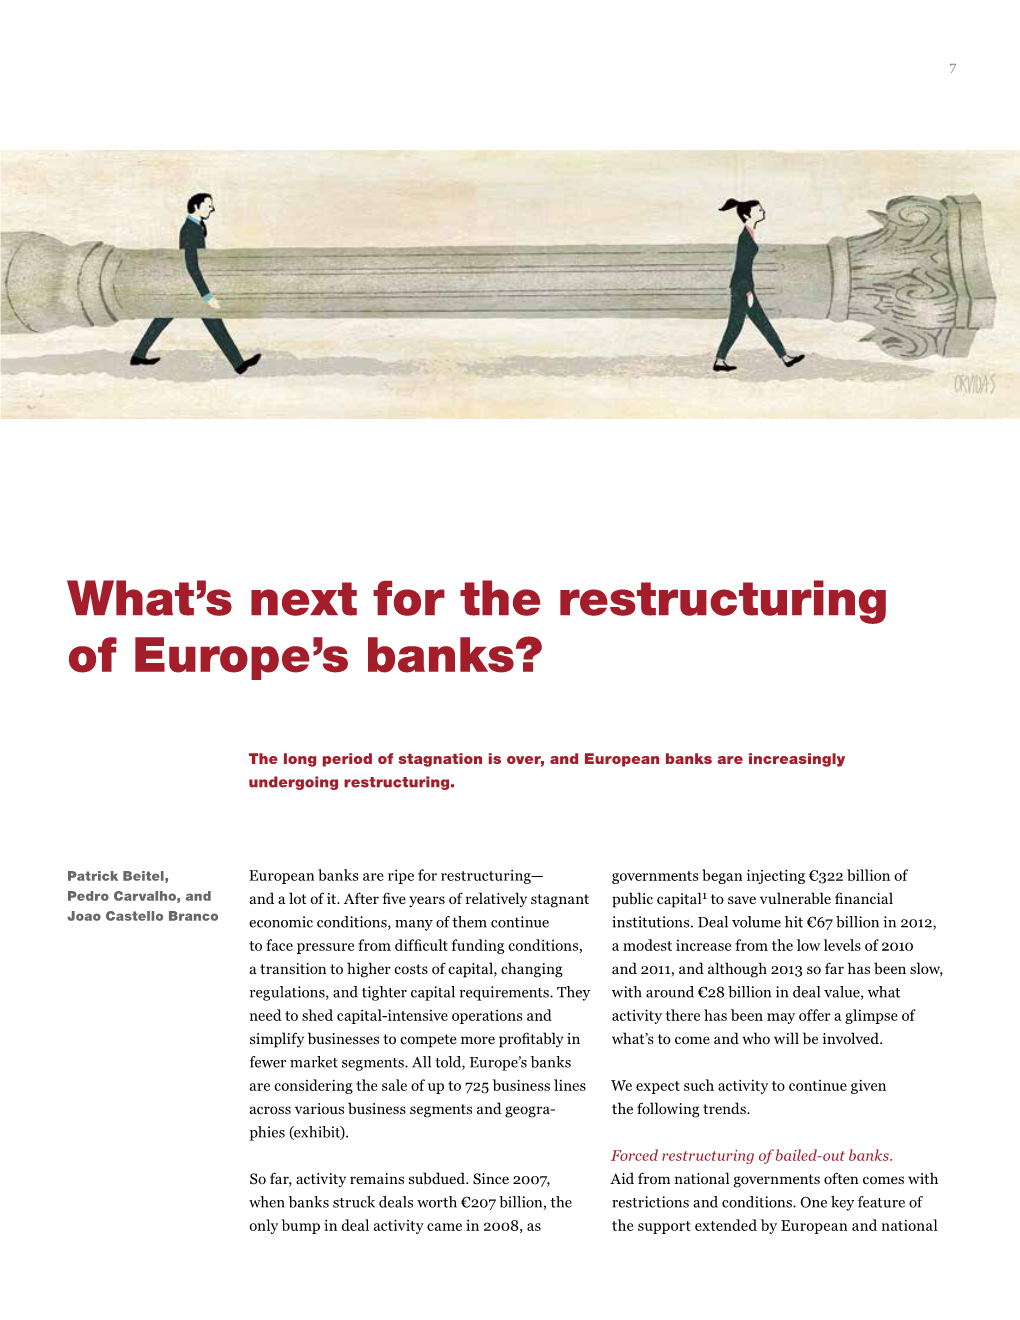 What's Next for the Restructuring of Europe's Banks?